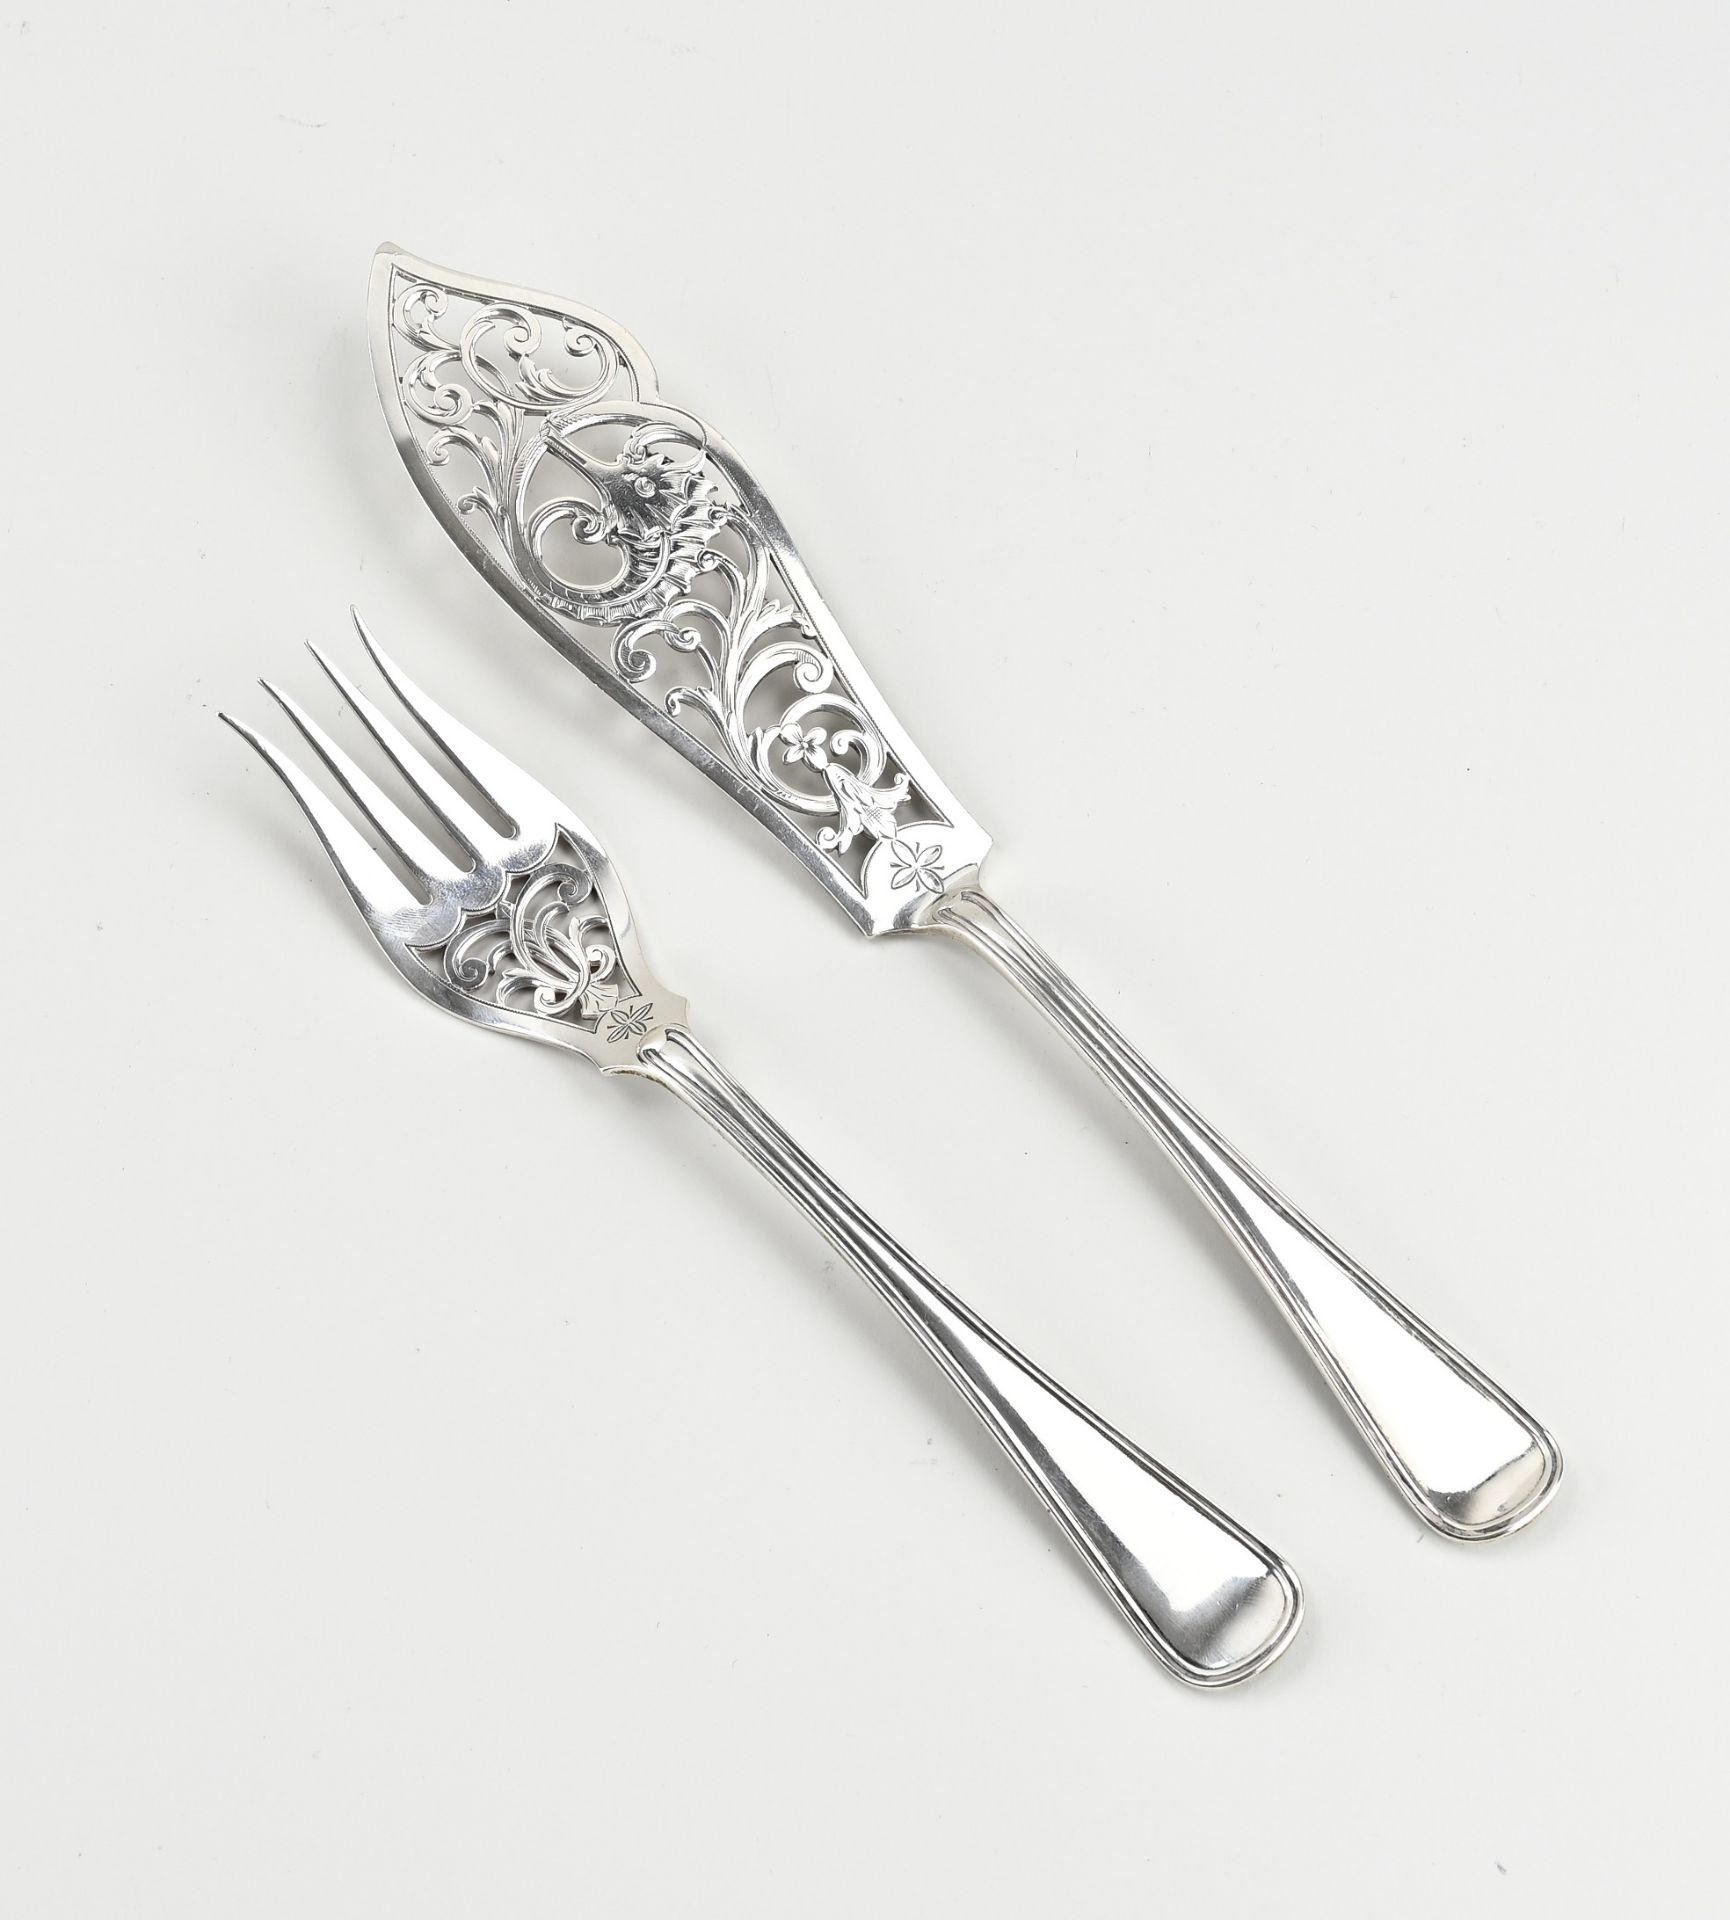 Silver fish serving cutlery